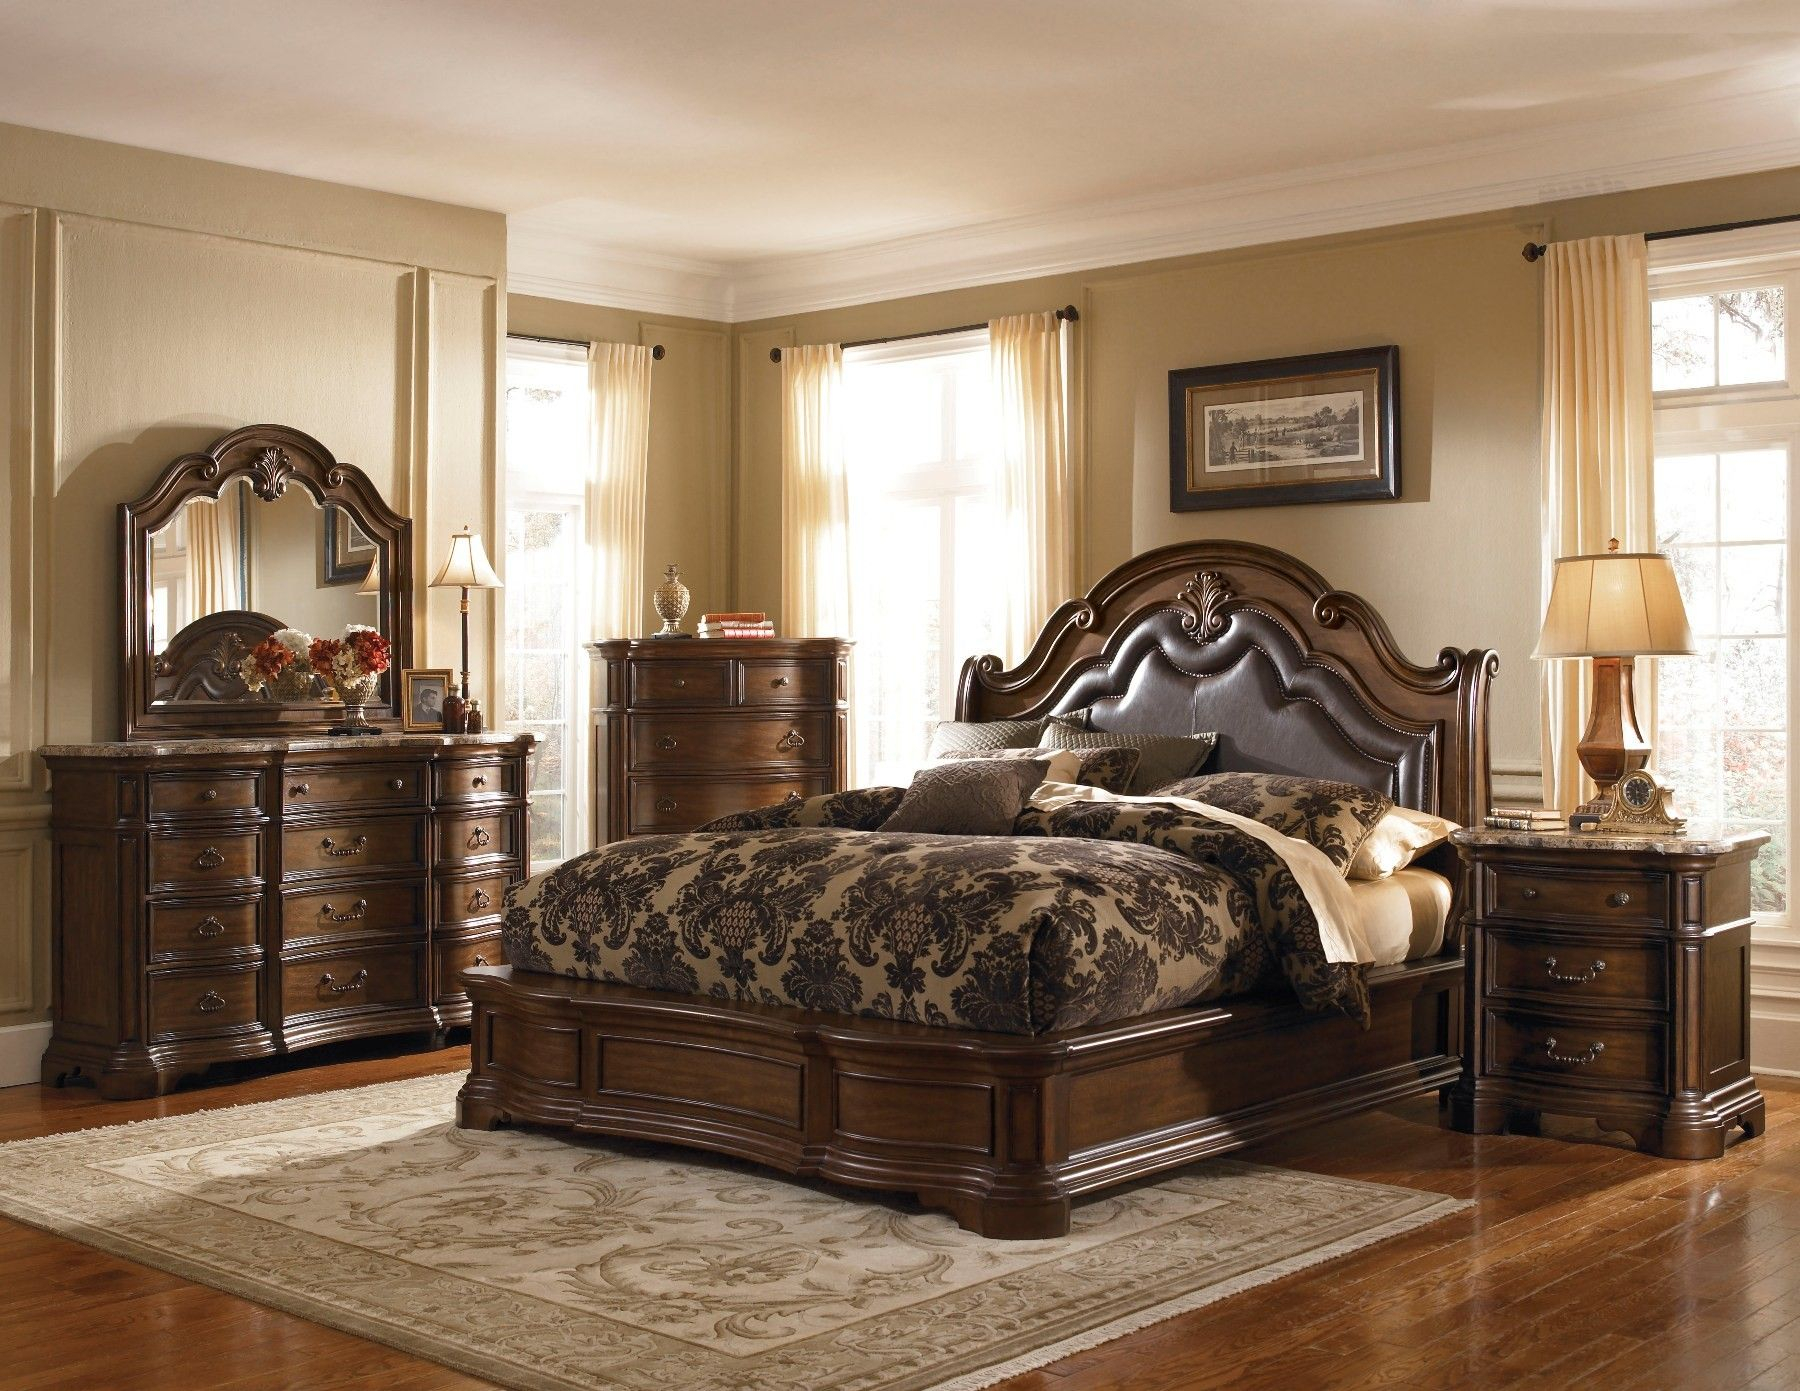 Pulaski Bedroom Furniture Wholesale Closeouts Courtland Bedroom intended for measurements 1800 X 1391